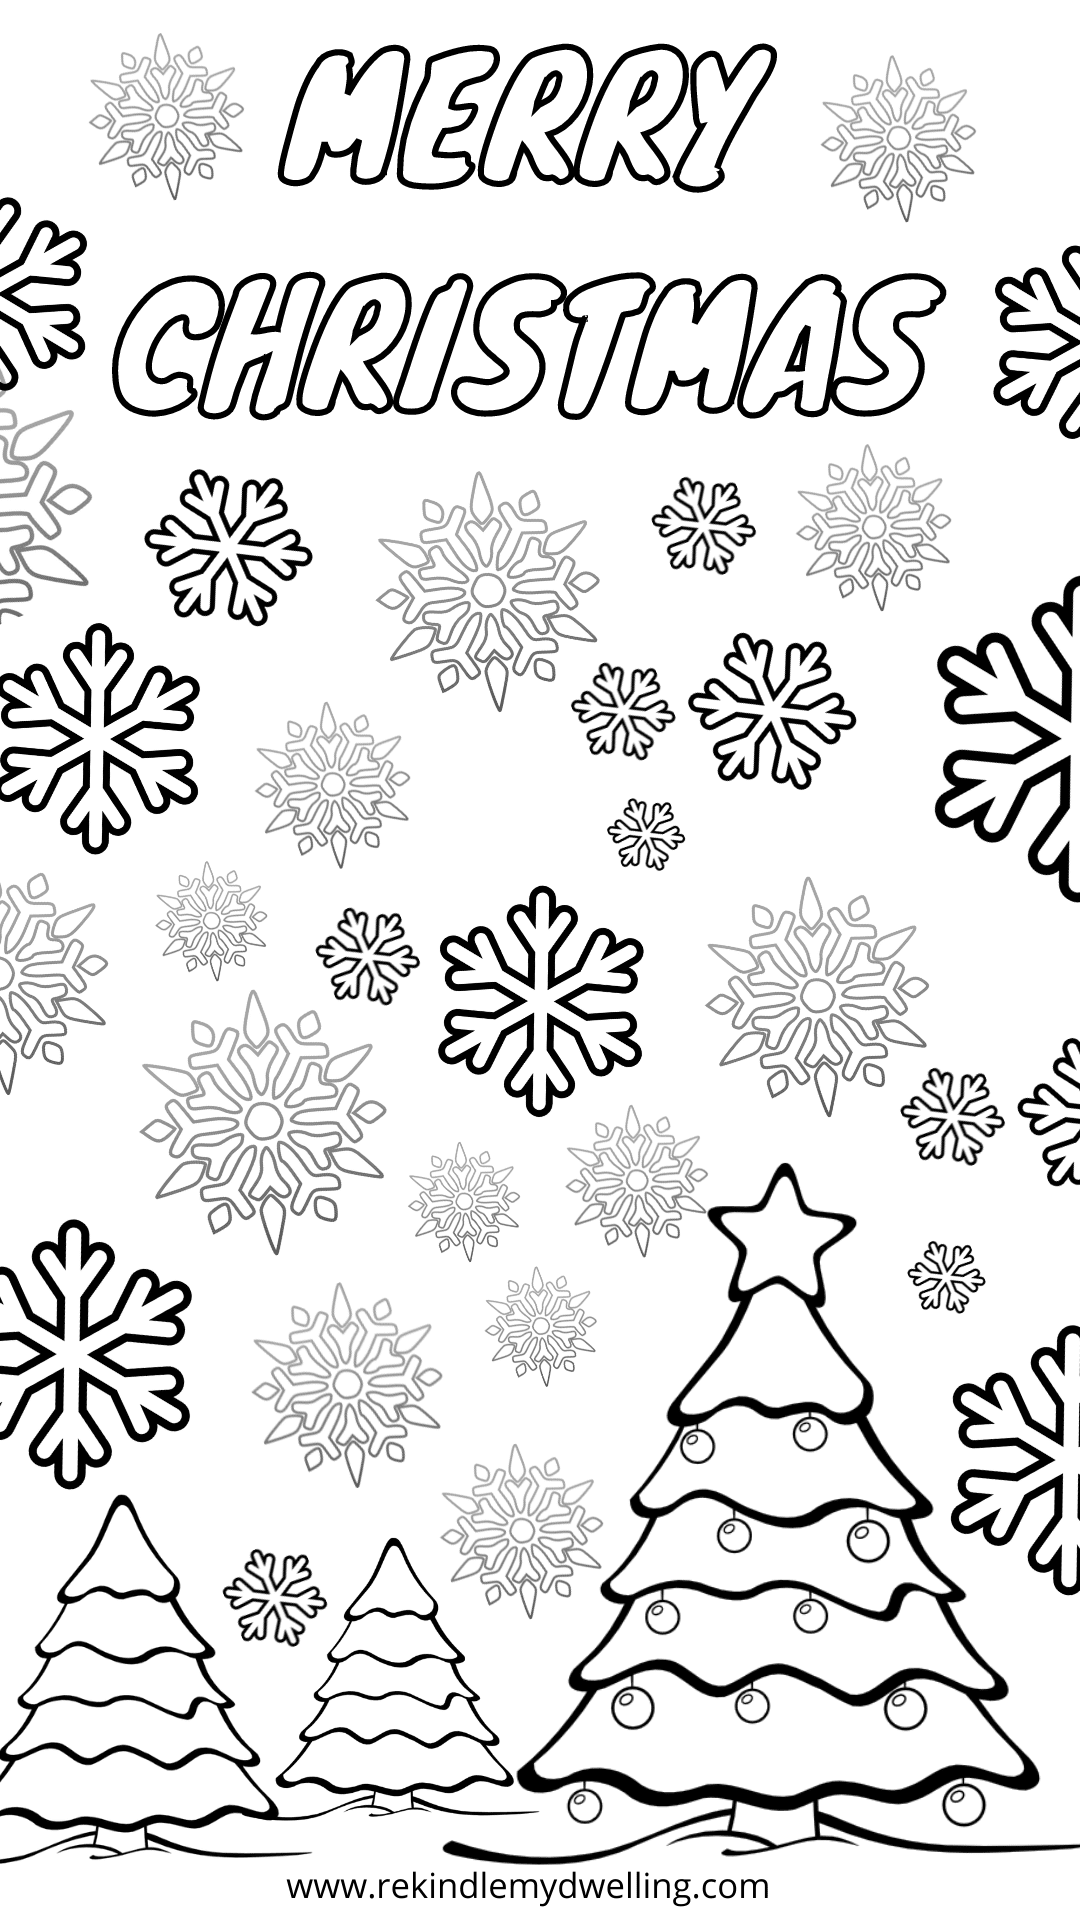 Christmas coloring page with trees and snowflakes.